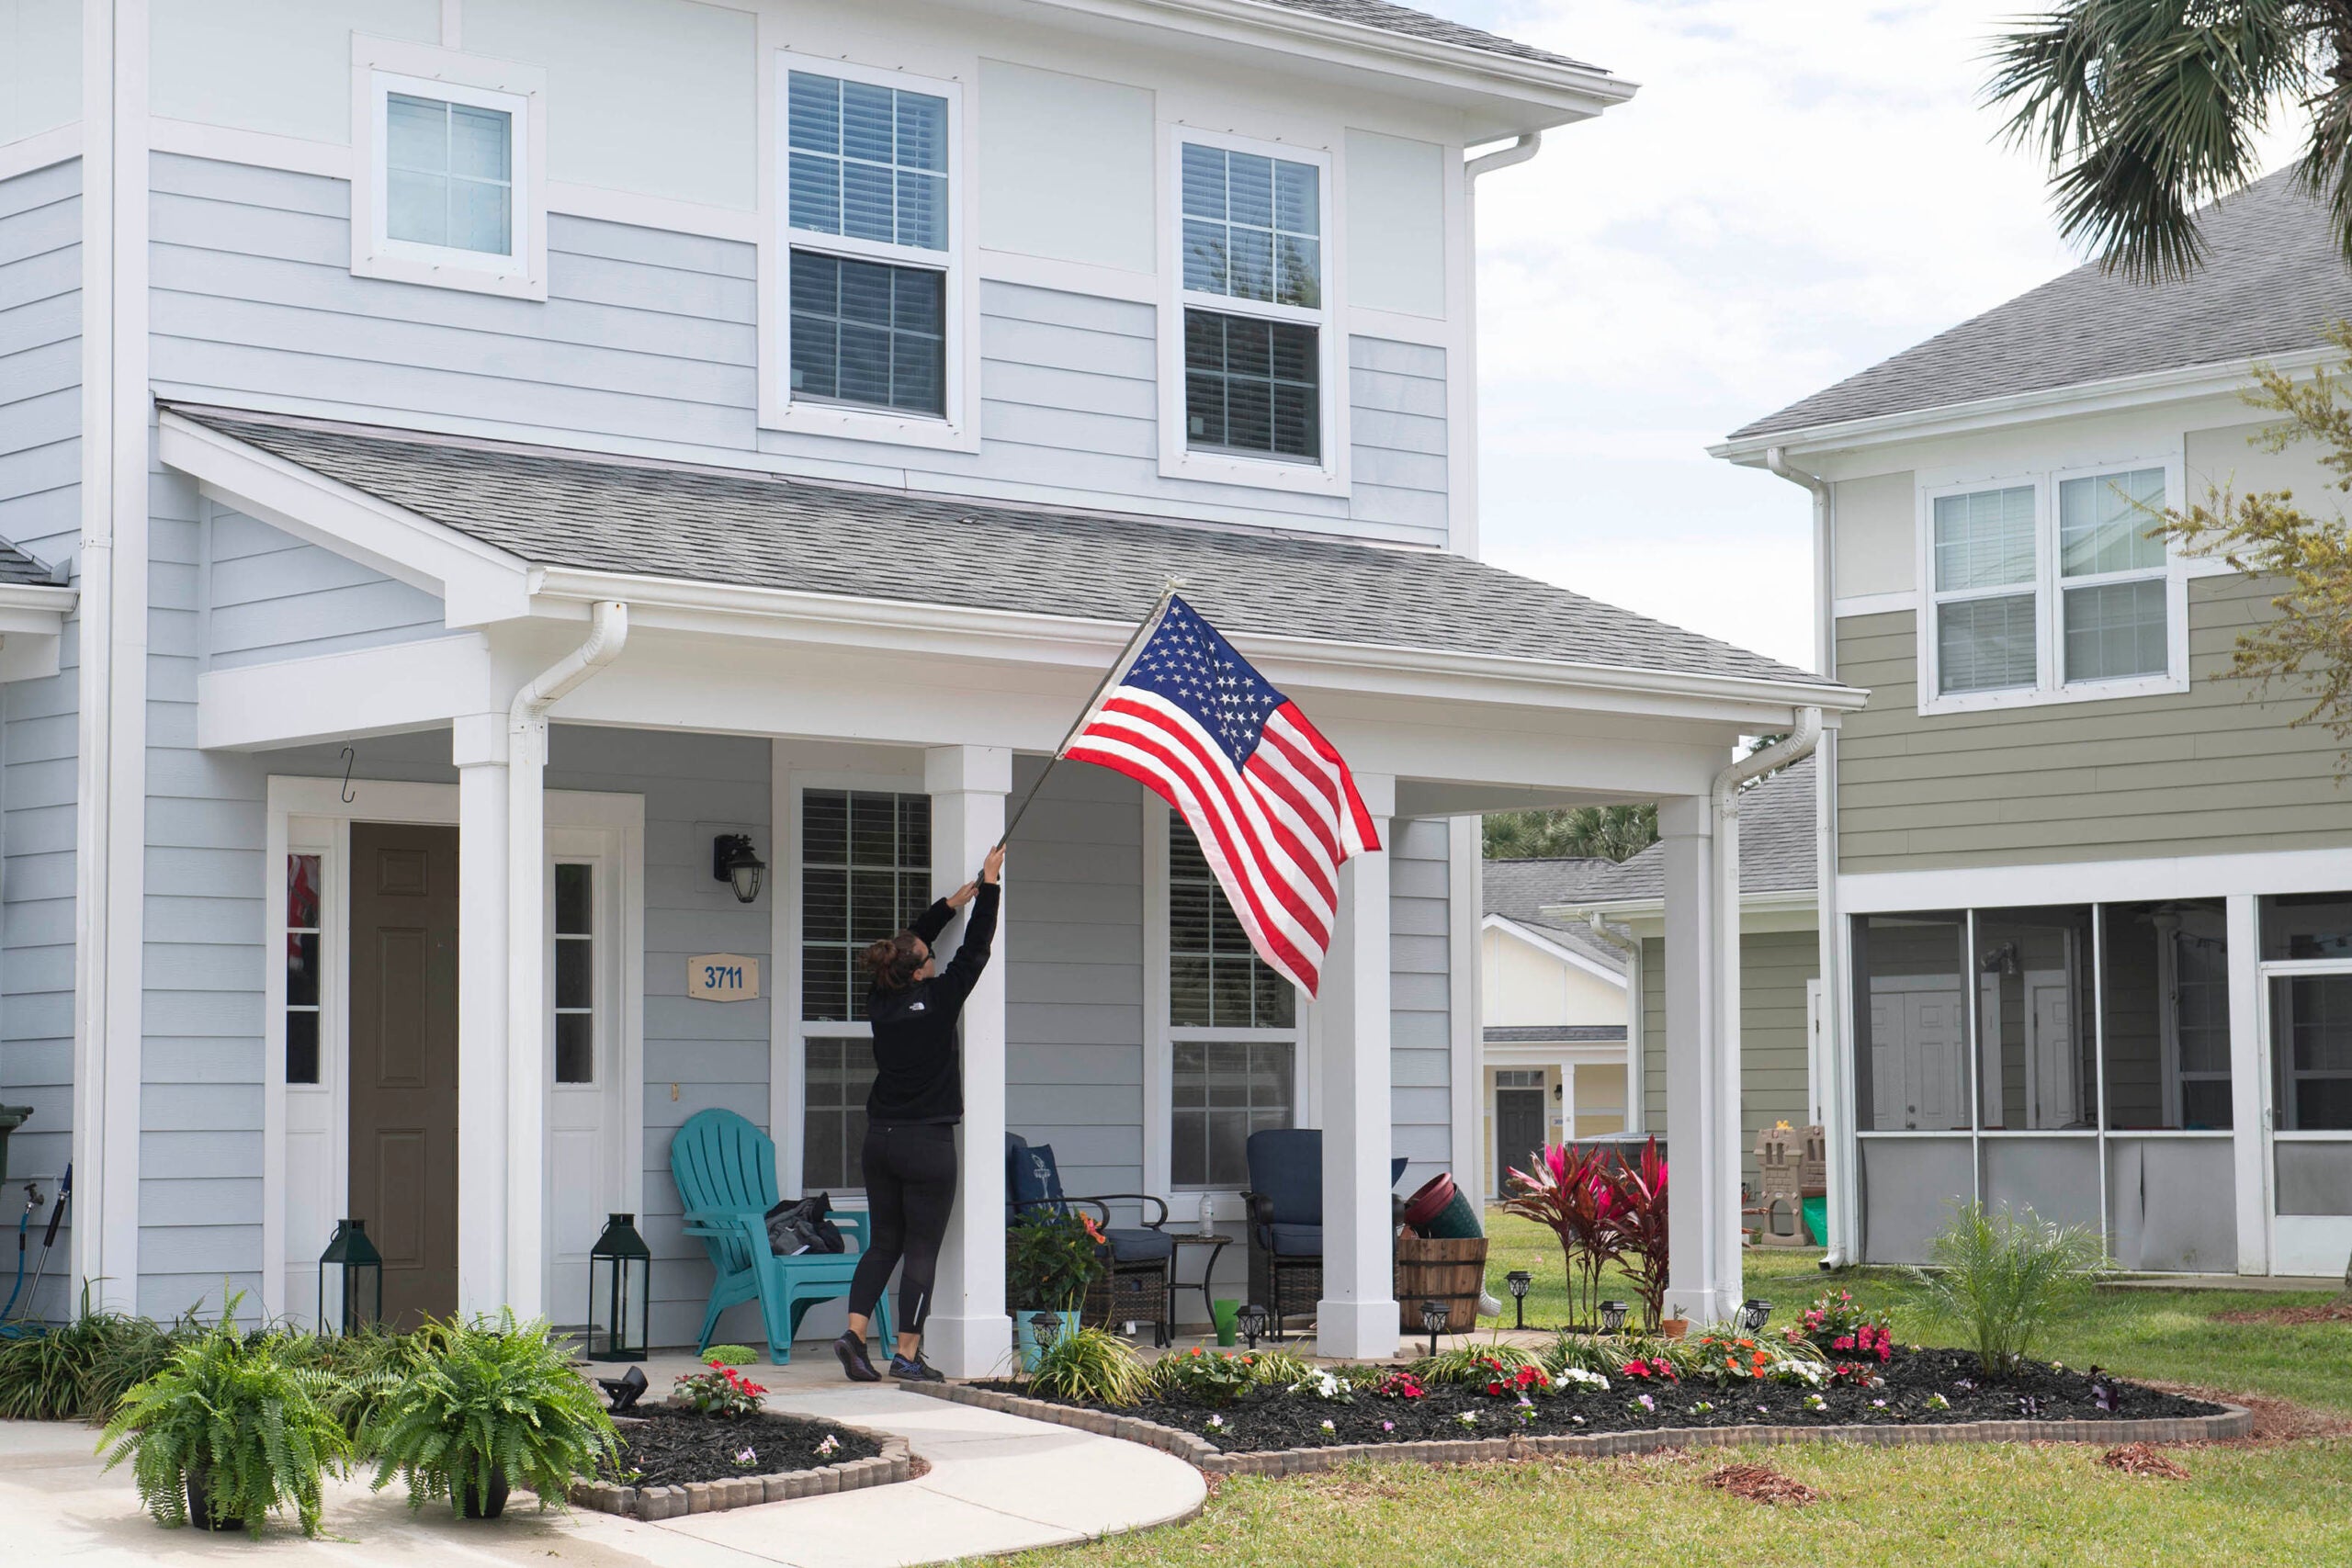 190318-N-DW182-182 
MAYPORT, Fla. (March 18, 2019) Crista Gyates, a resident at Balfour Beatty Housing, raises the American flag at her home in Bennett Shores East, an on-base military housing community at Naval Station Mayport. (U.S. Navy photo by Mass Communication Specialist 2nd Class Devin Bowser/Released)